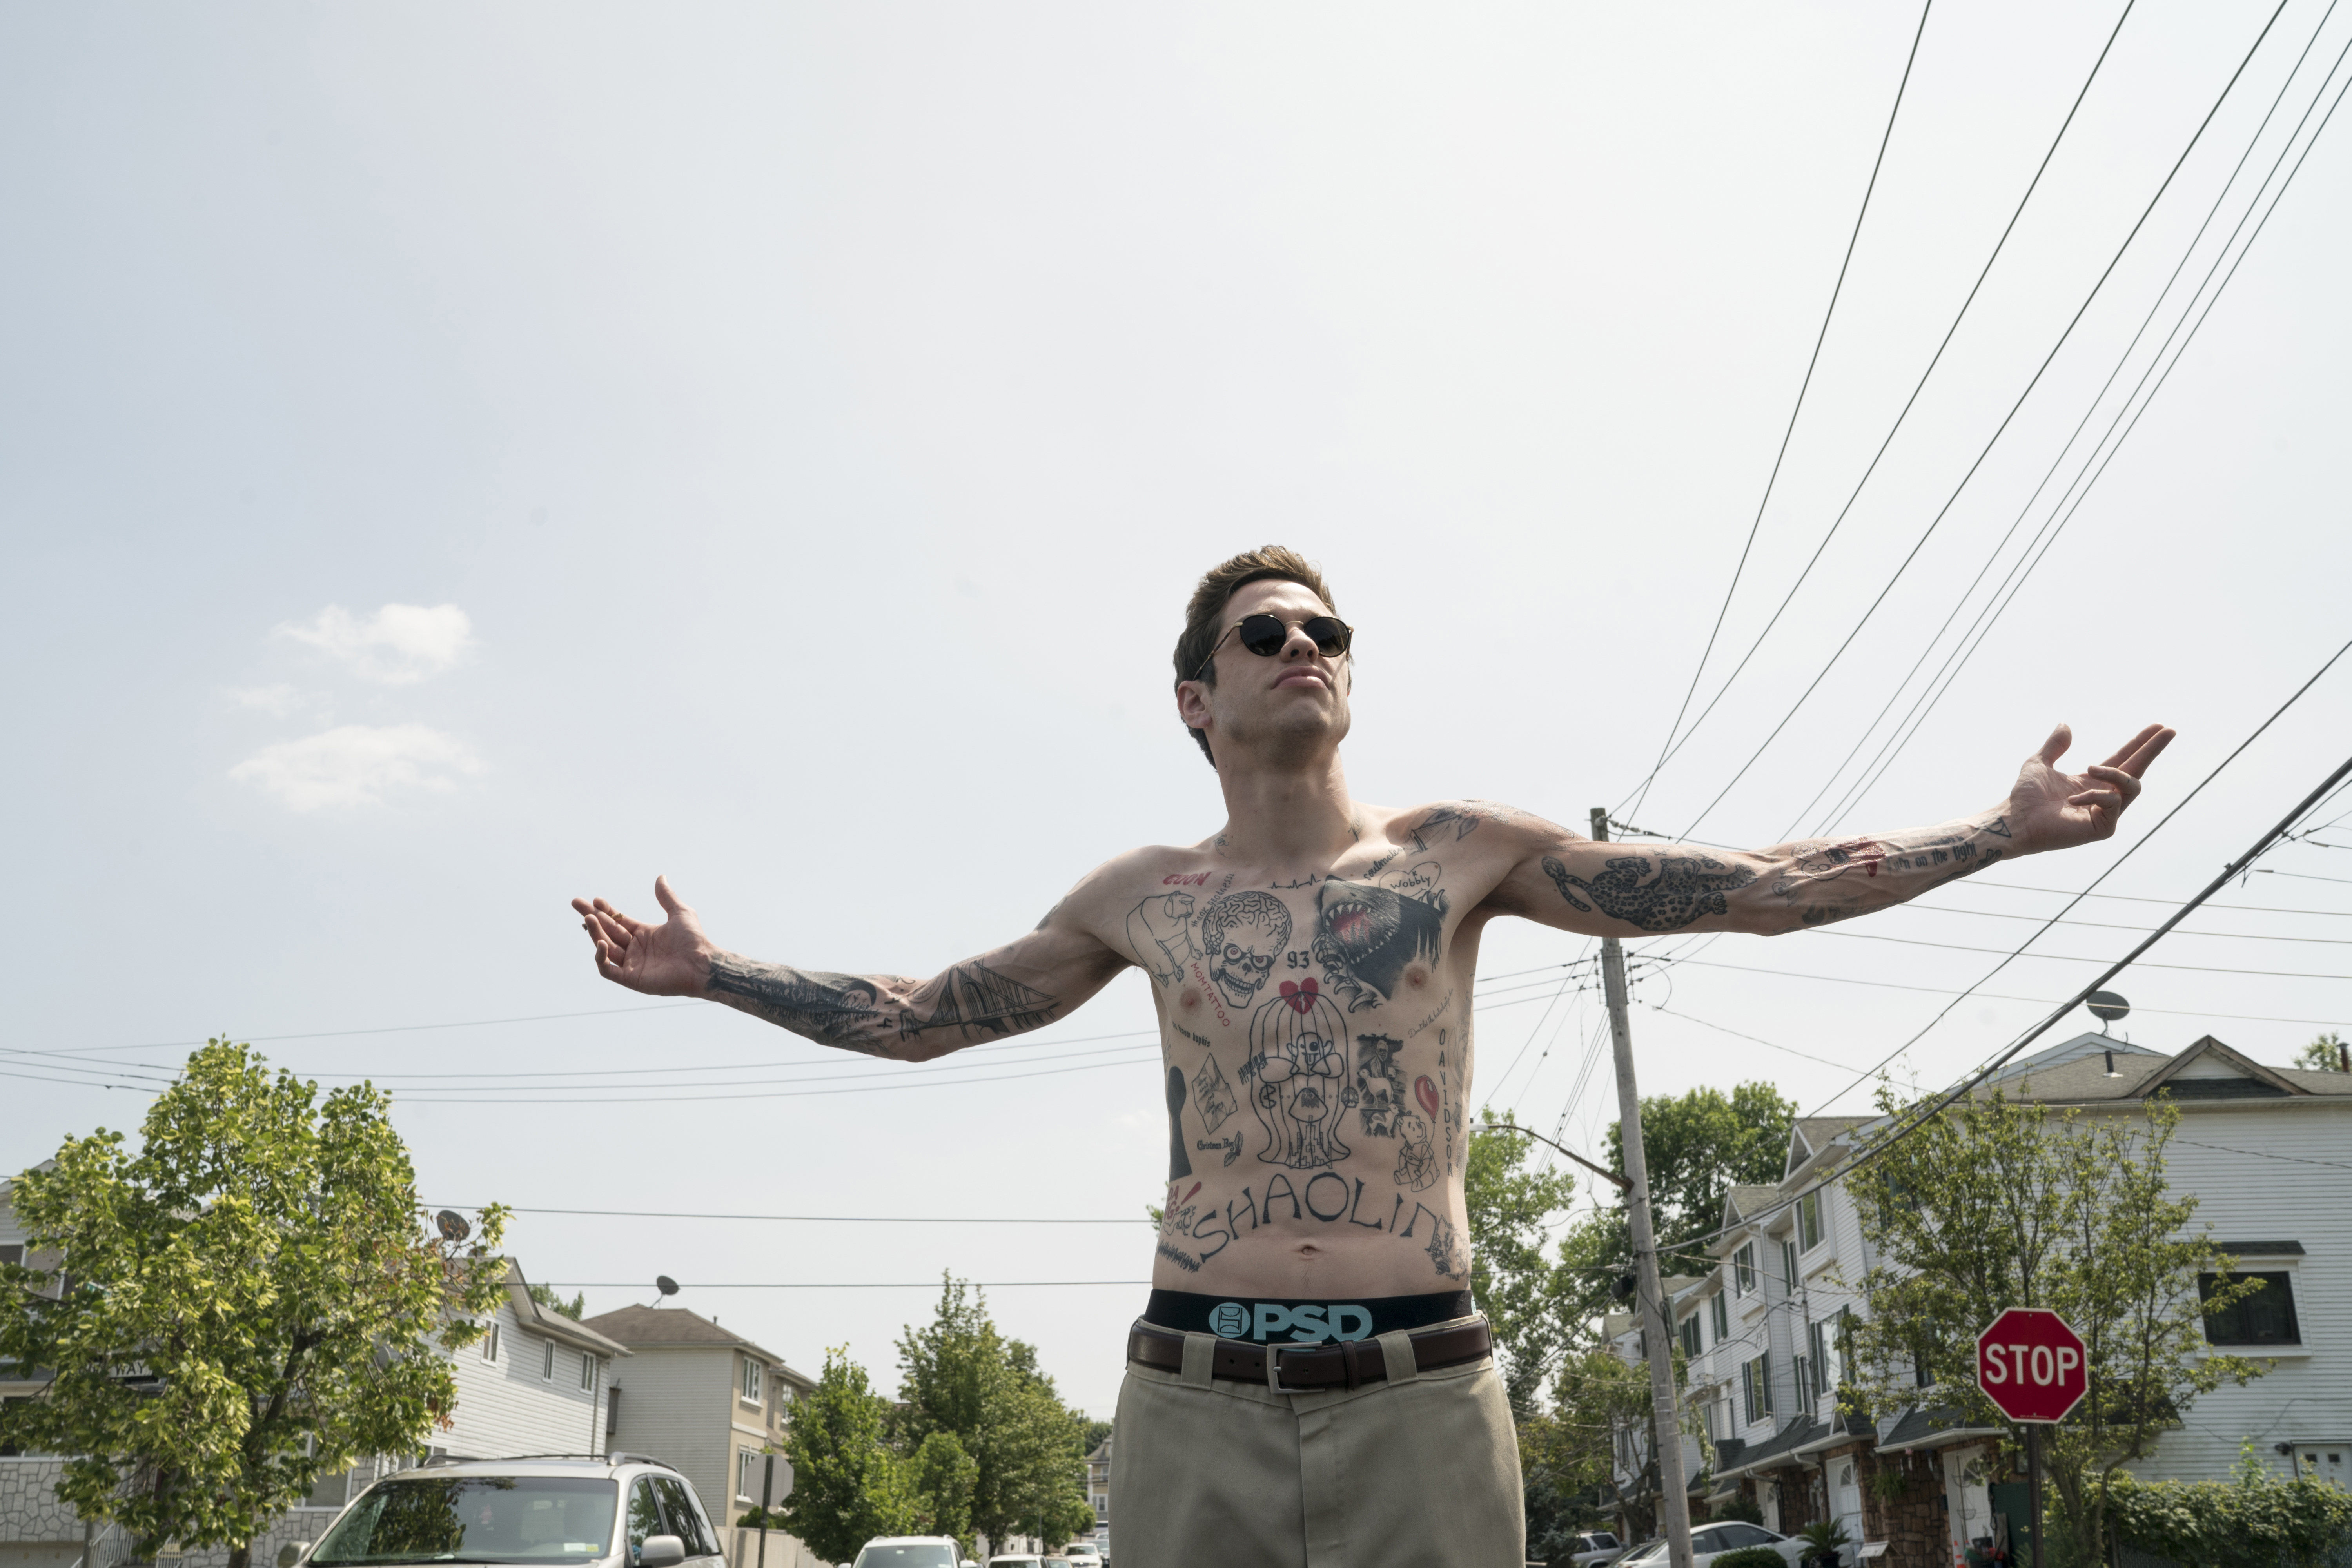 The King Of Staten Island Wallpapers